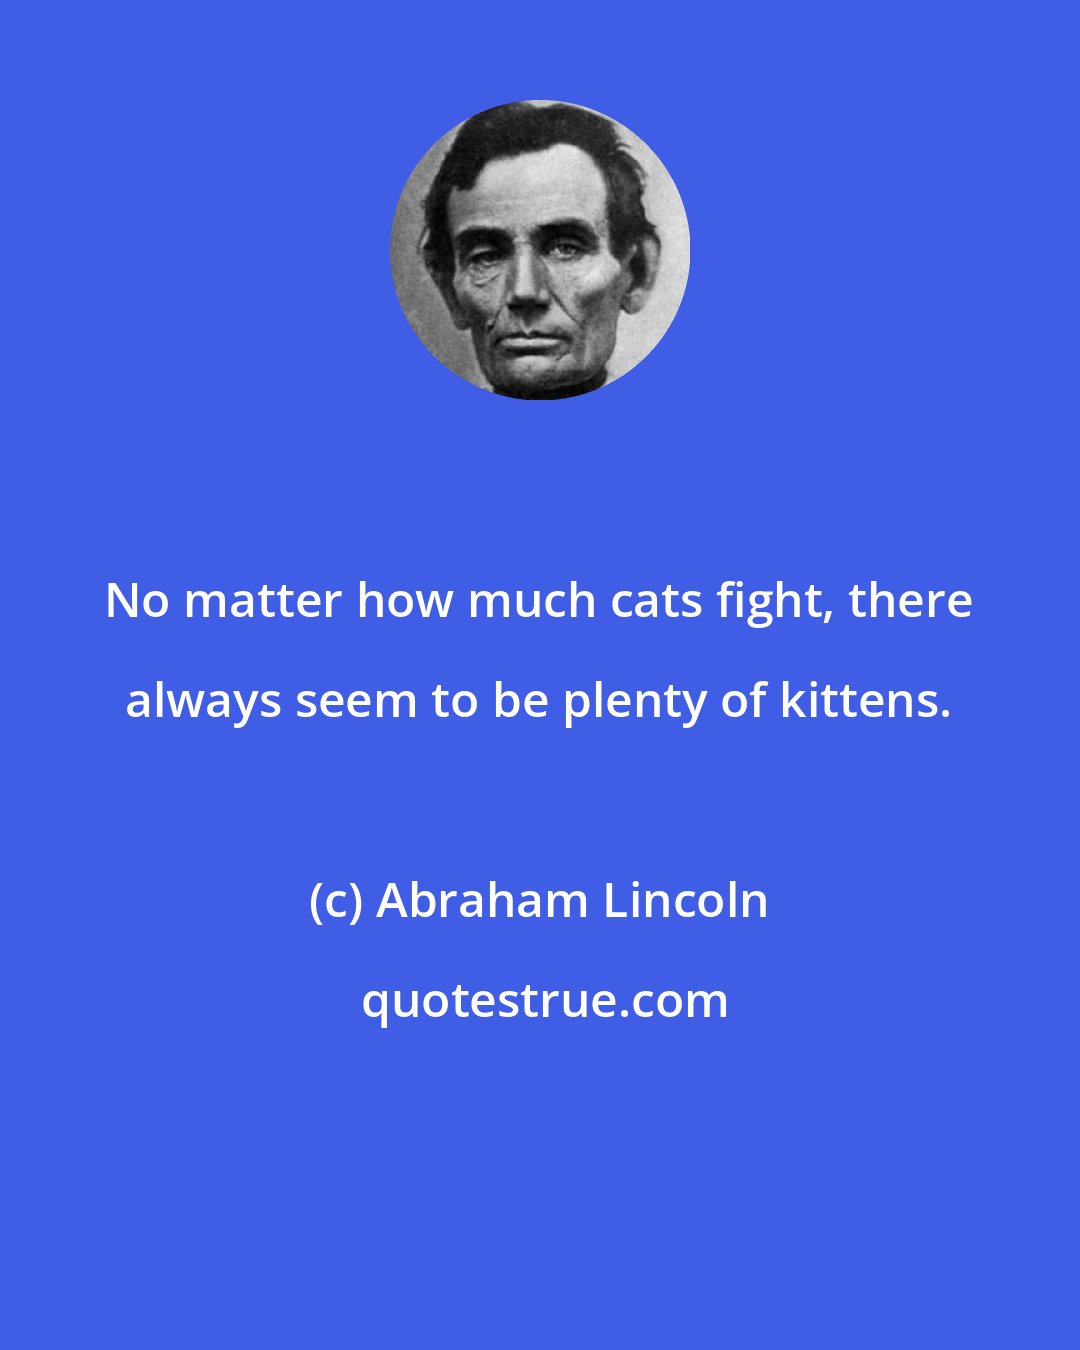 Abraham Lincoln: No matter how much cats fight, there always seem to be plenty of kittens.